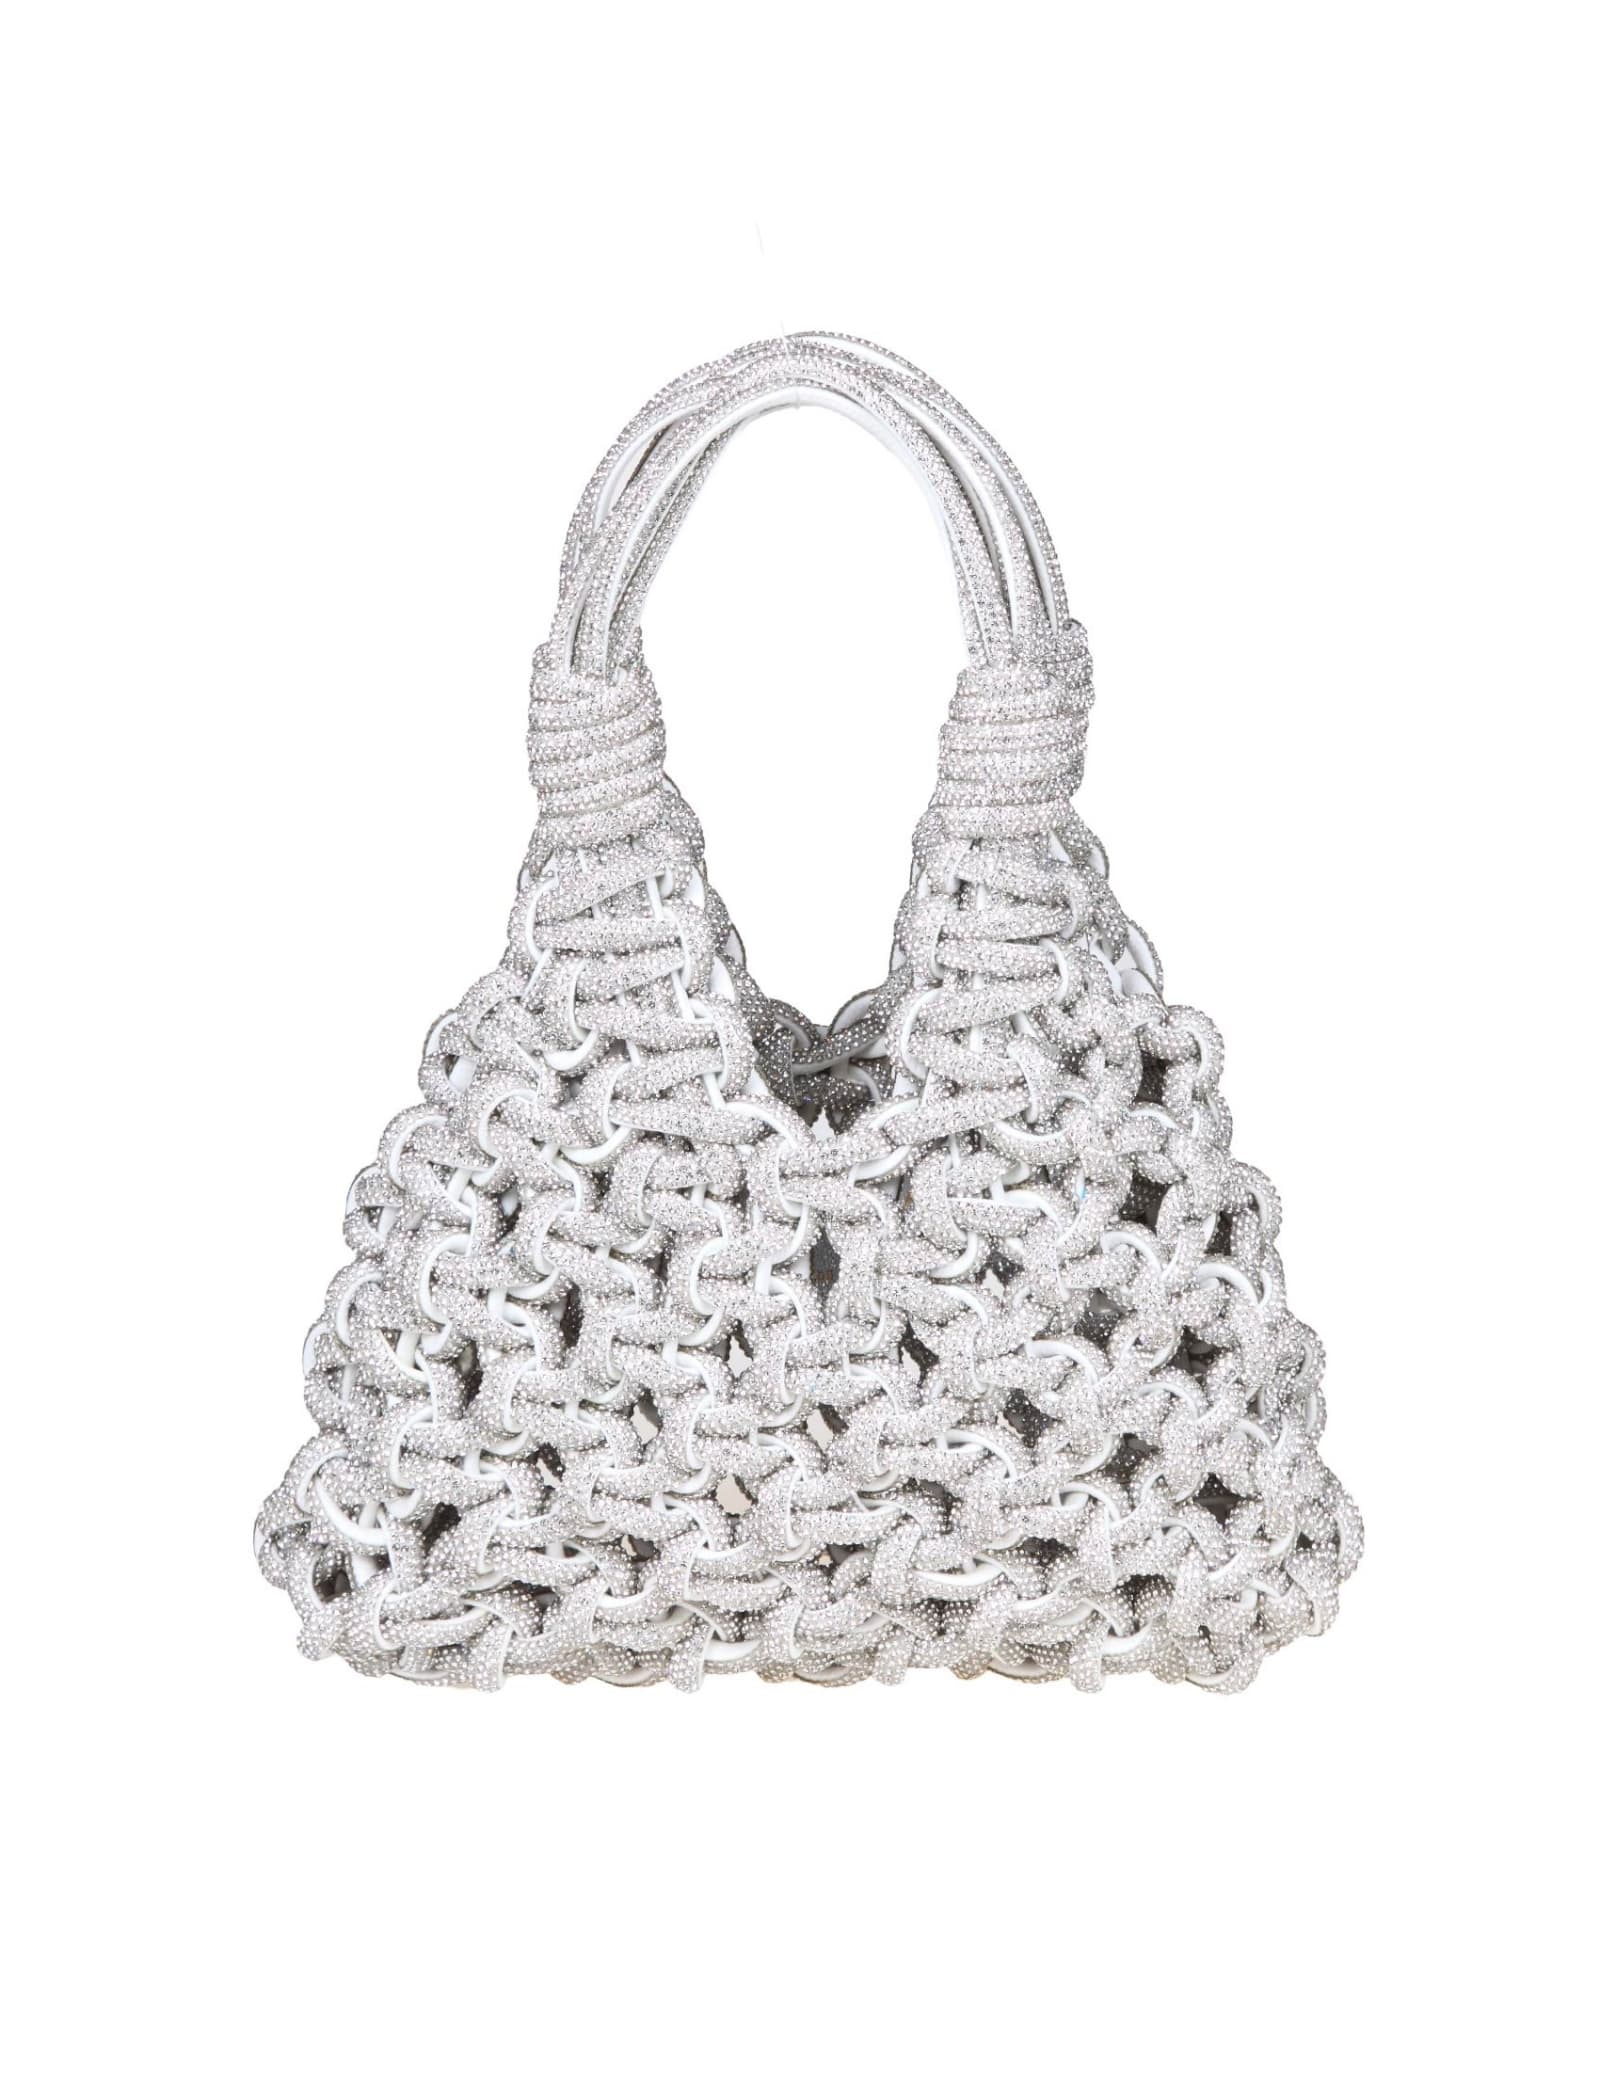 HIBOURAMA JEWEL BAG WITH WEAVING AND APPLIED CRYSTALS